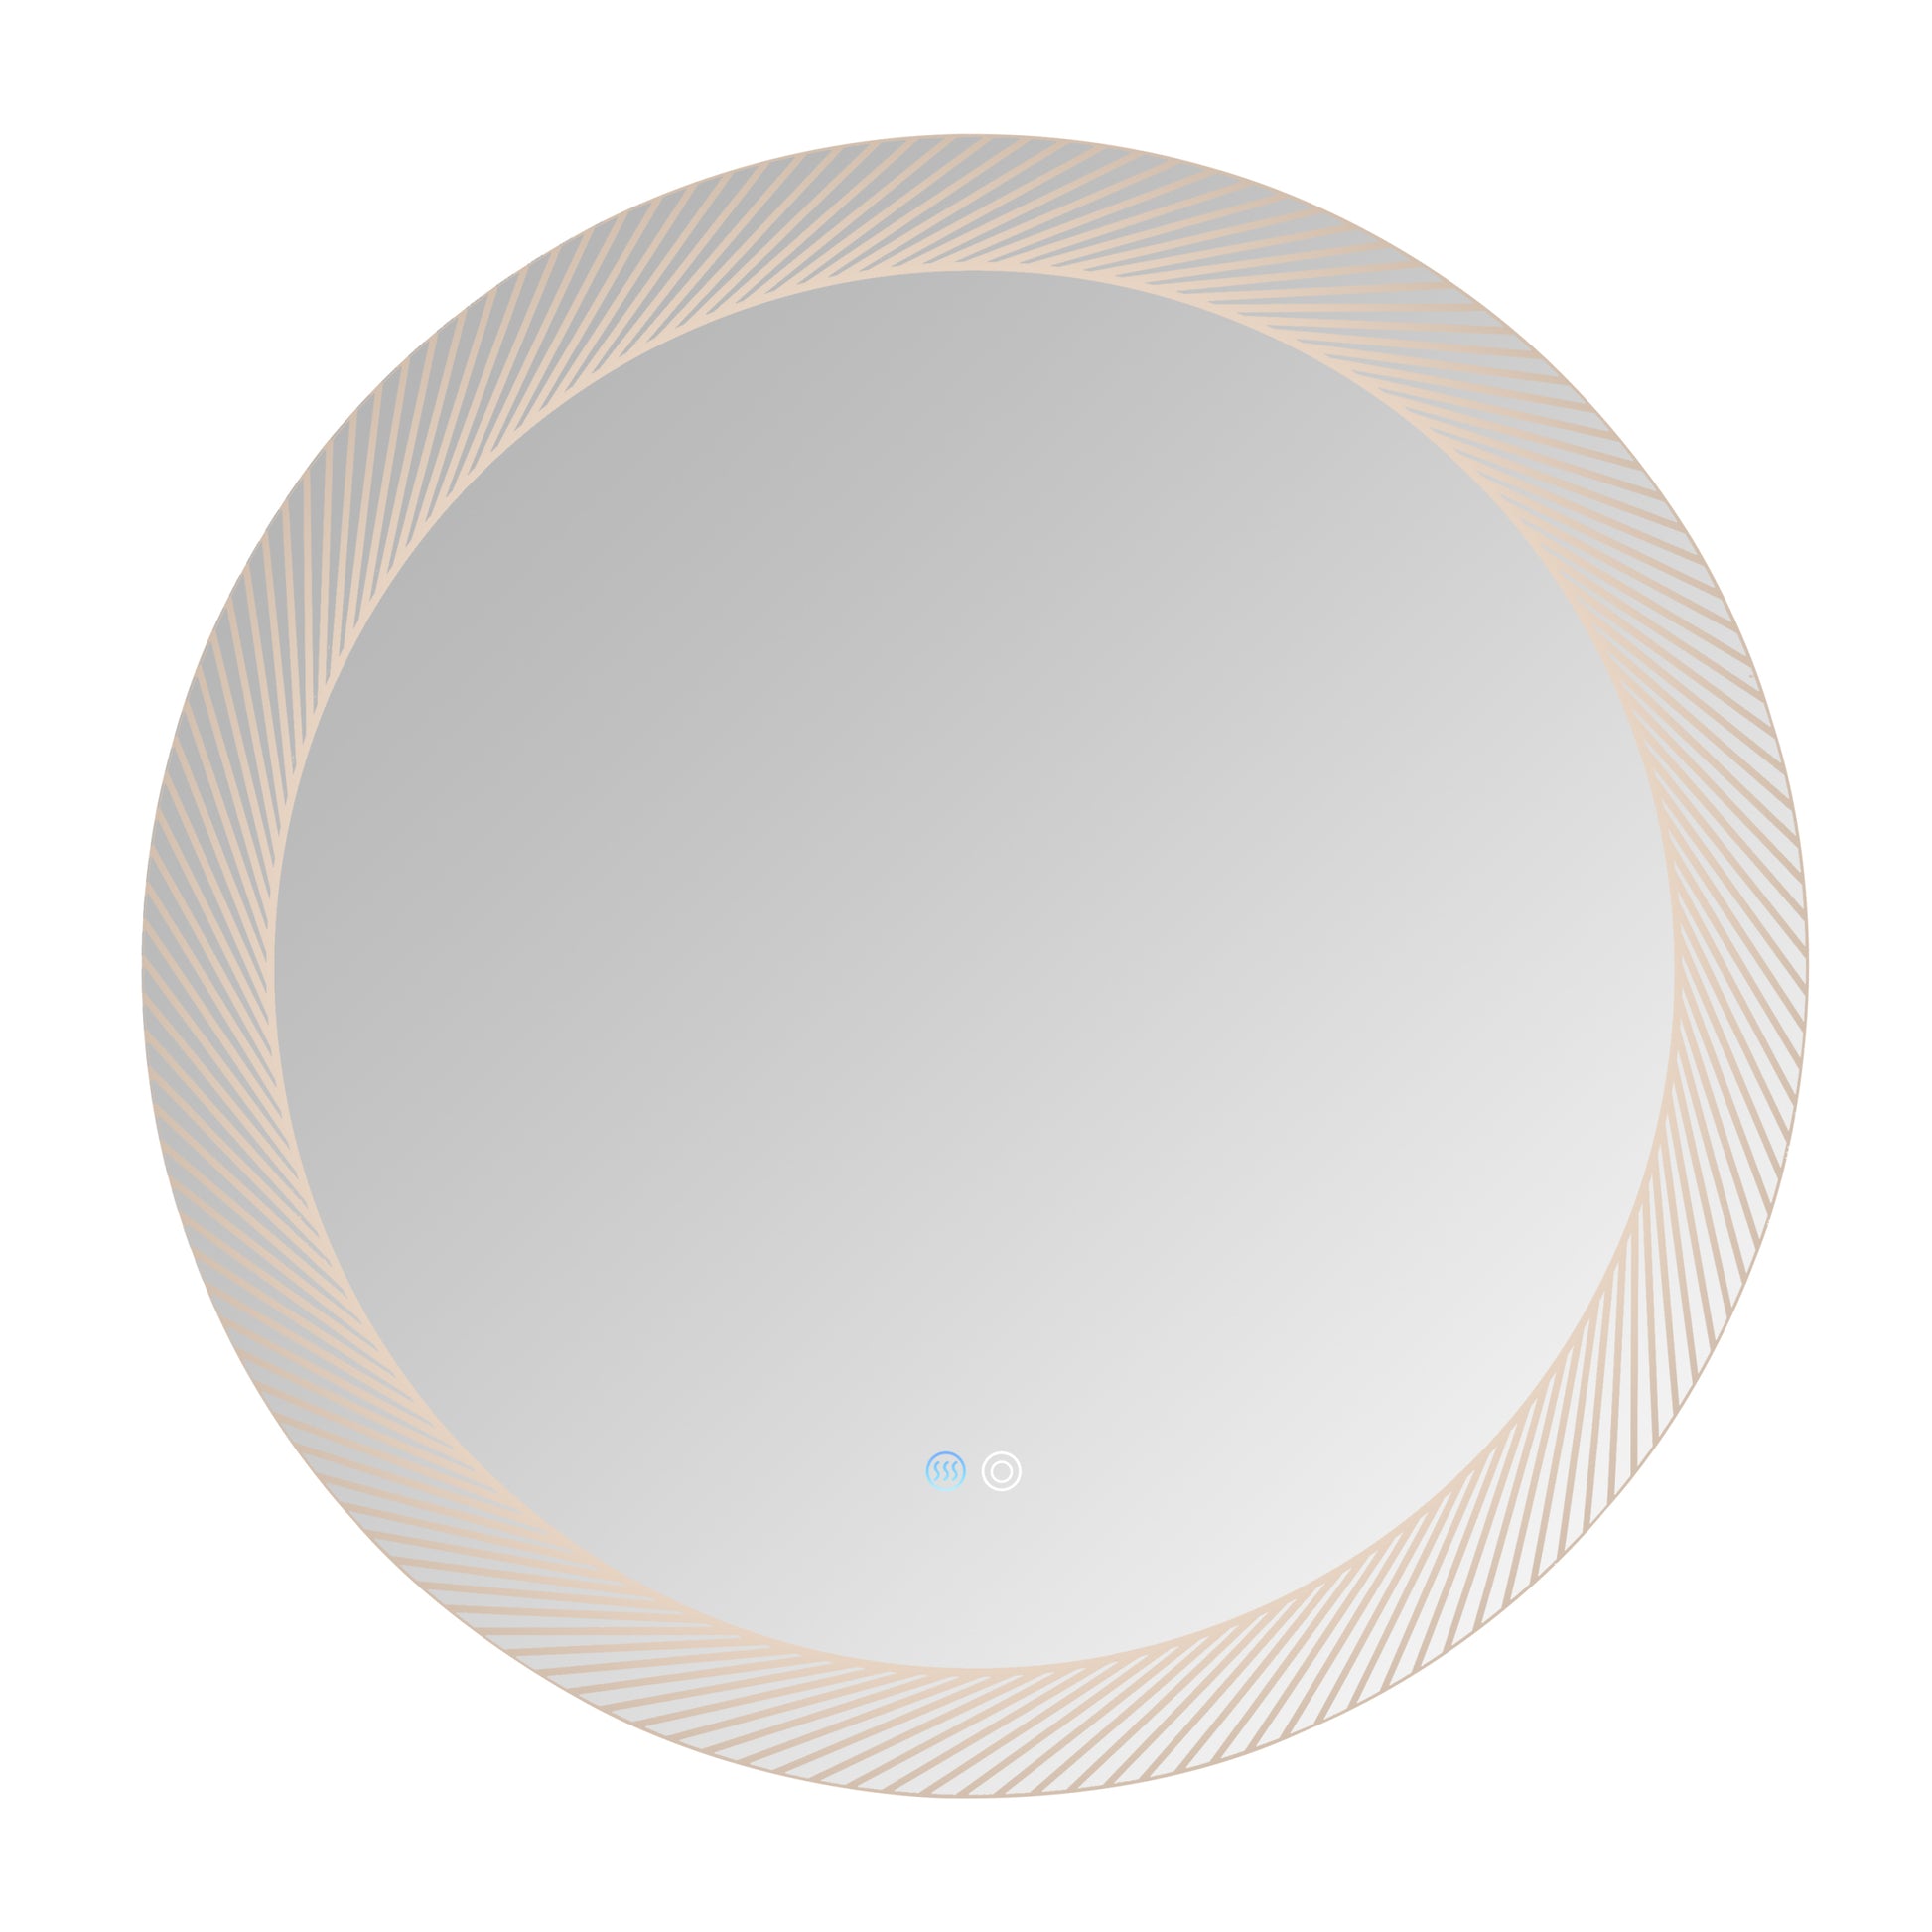 30 Inch LED Mirror, Wall Mounted Vanity Mirrors silver-glass